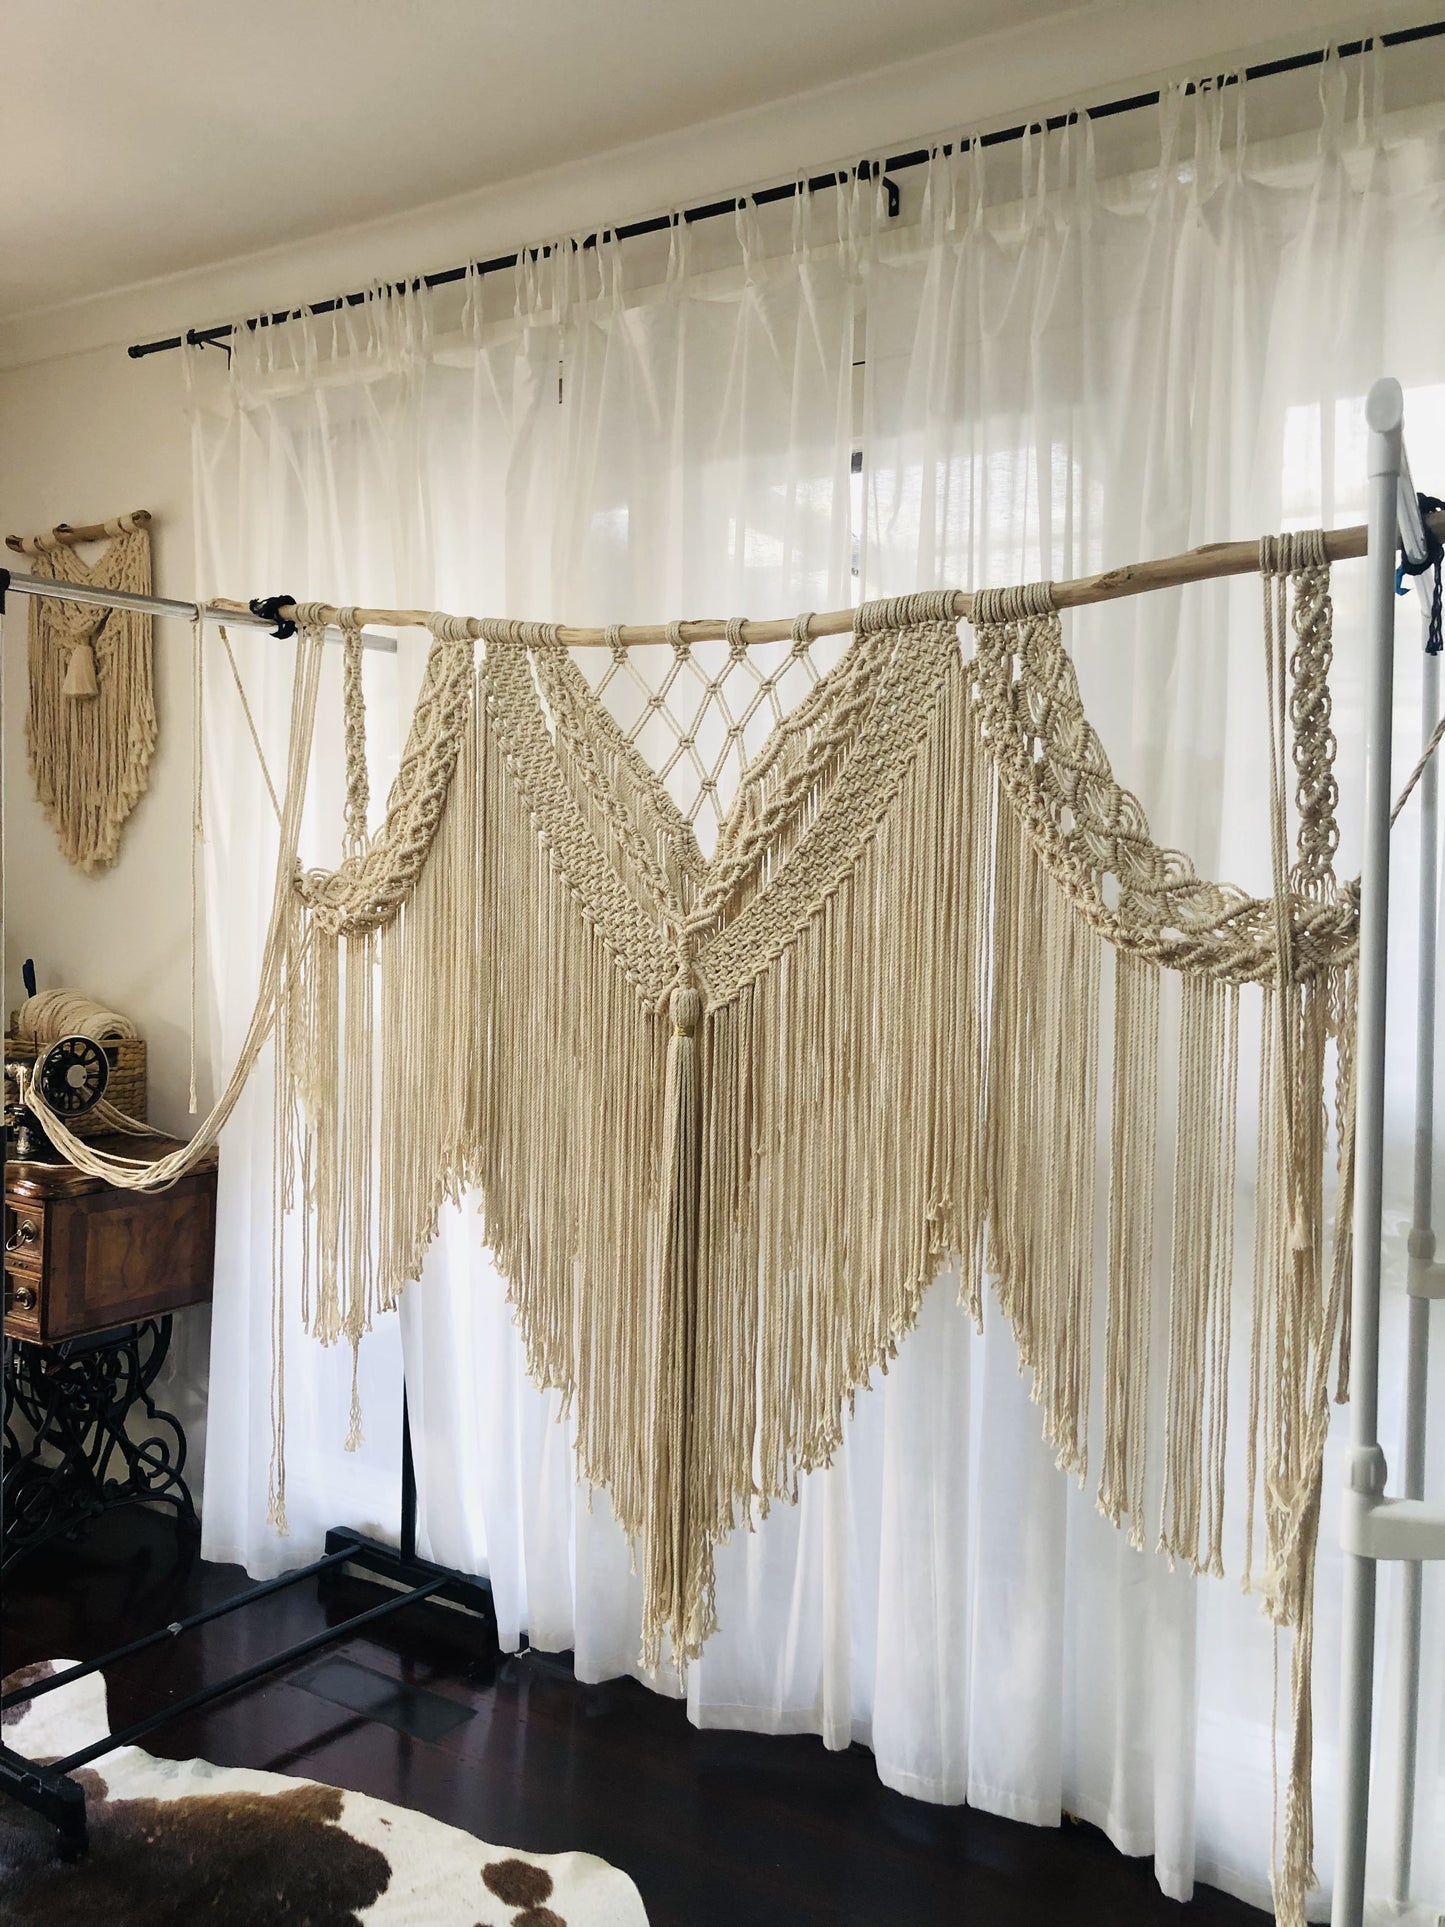 Boho Macrame Wall Hanging - Knotted by Hand